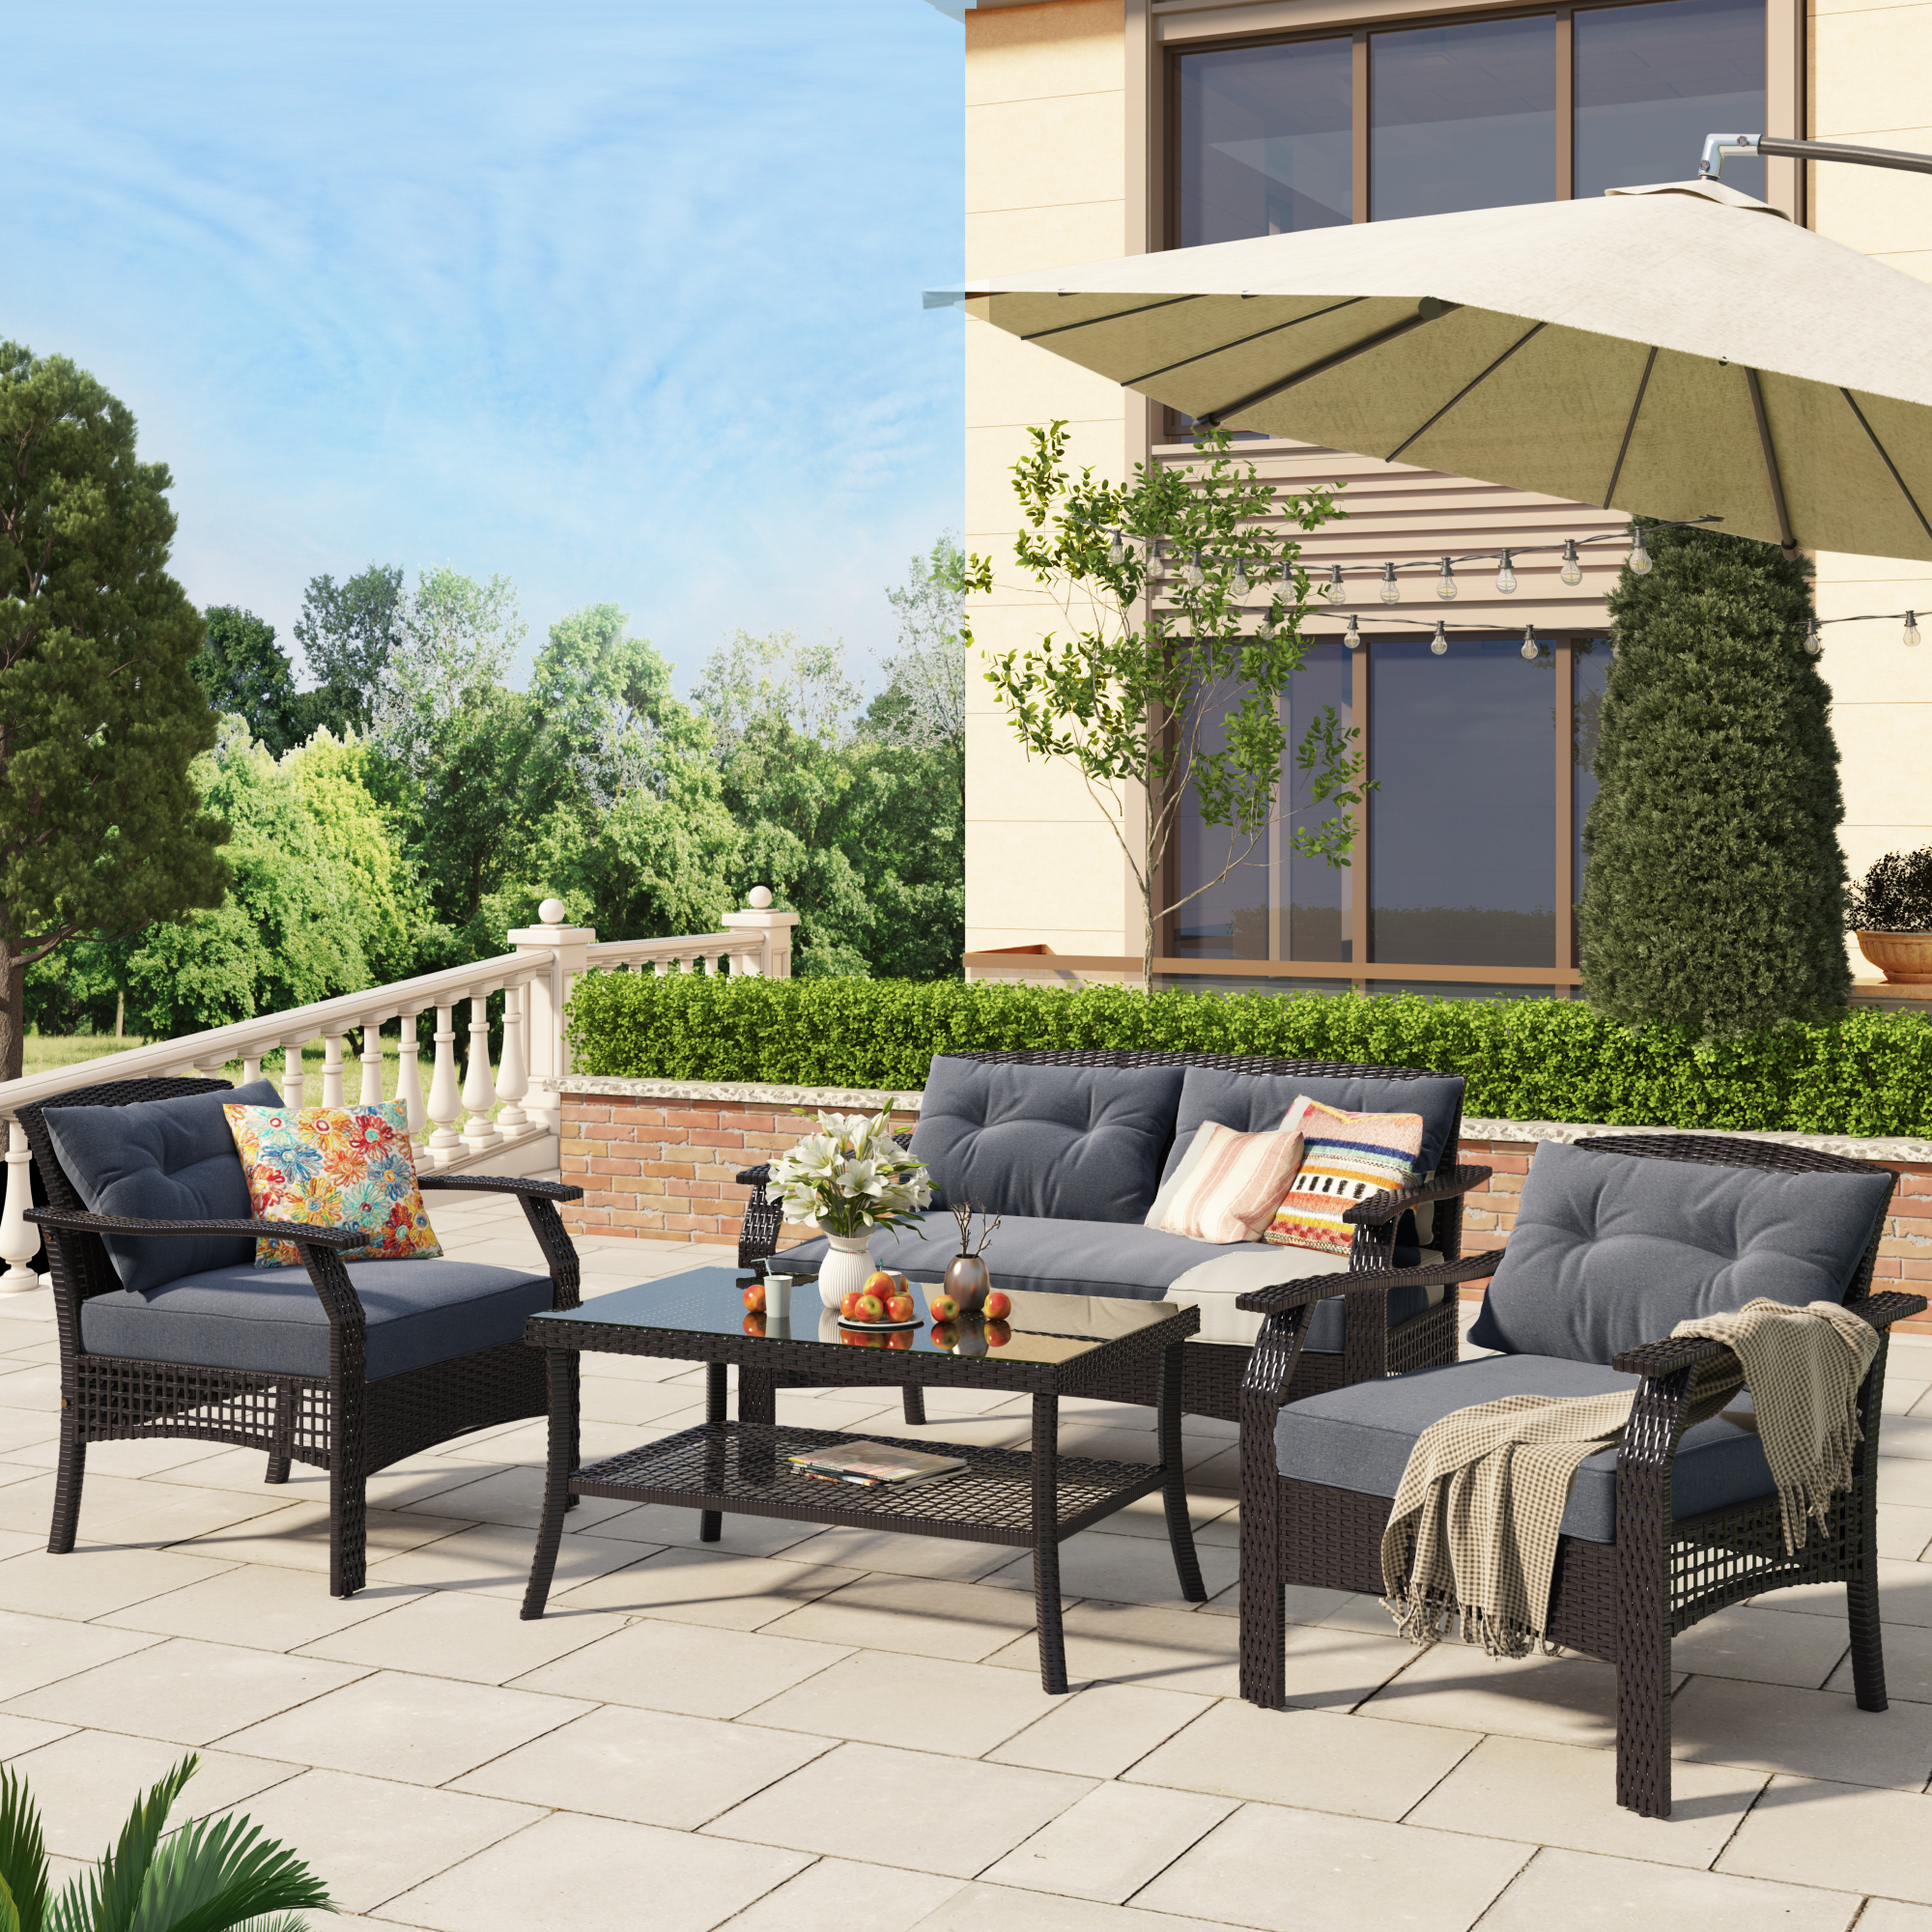 4 Piece Rattan Sofa Seating Group With Cushions - WY000171EAA